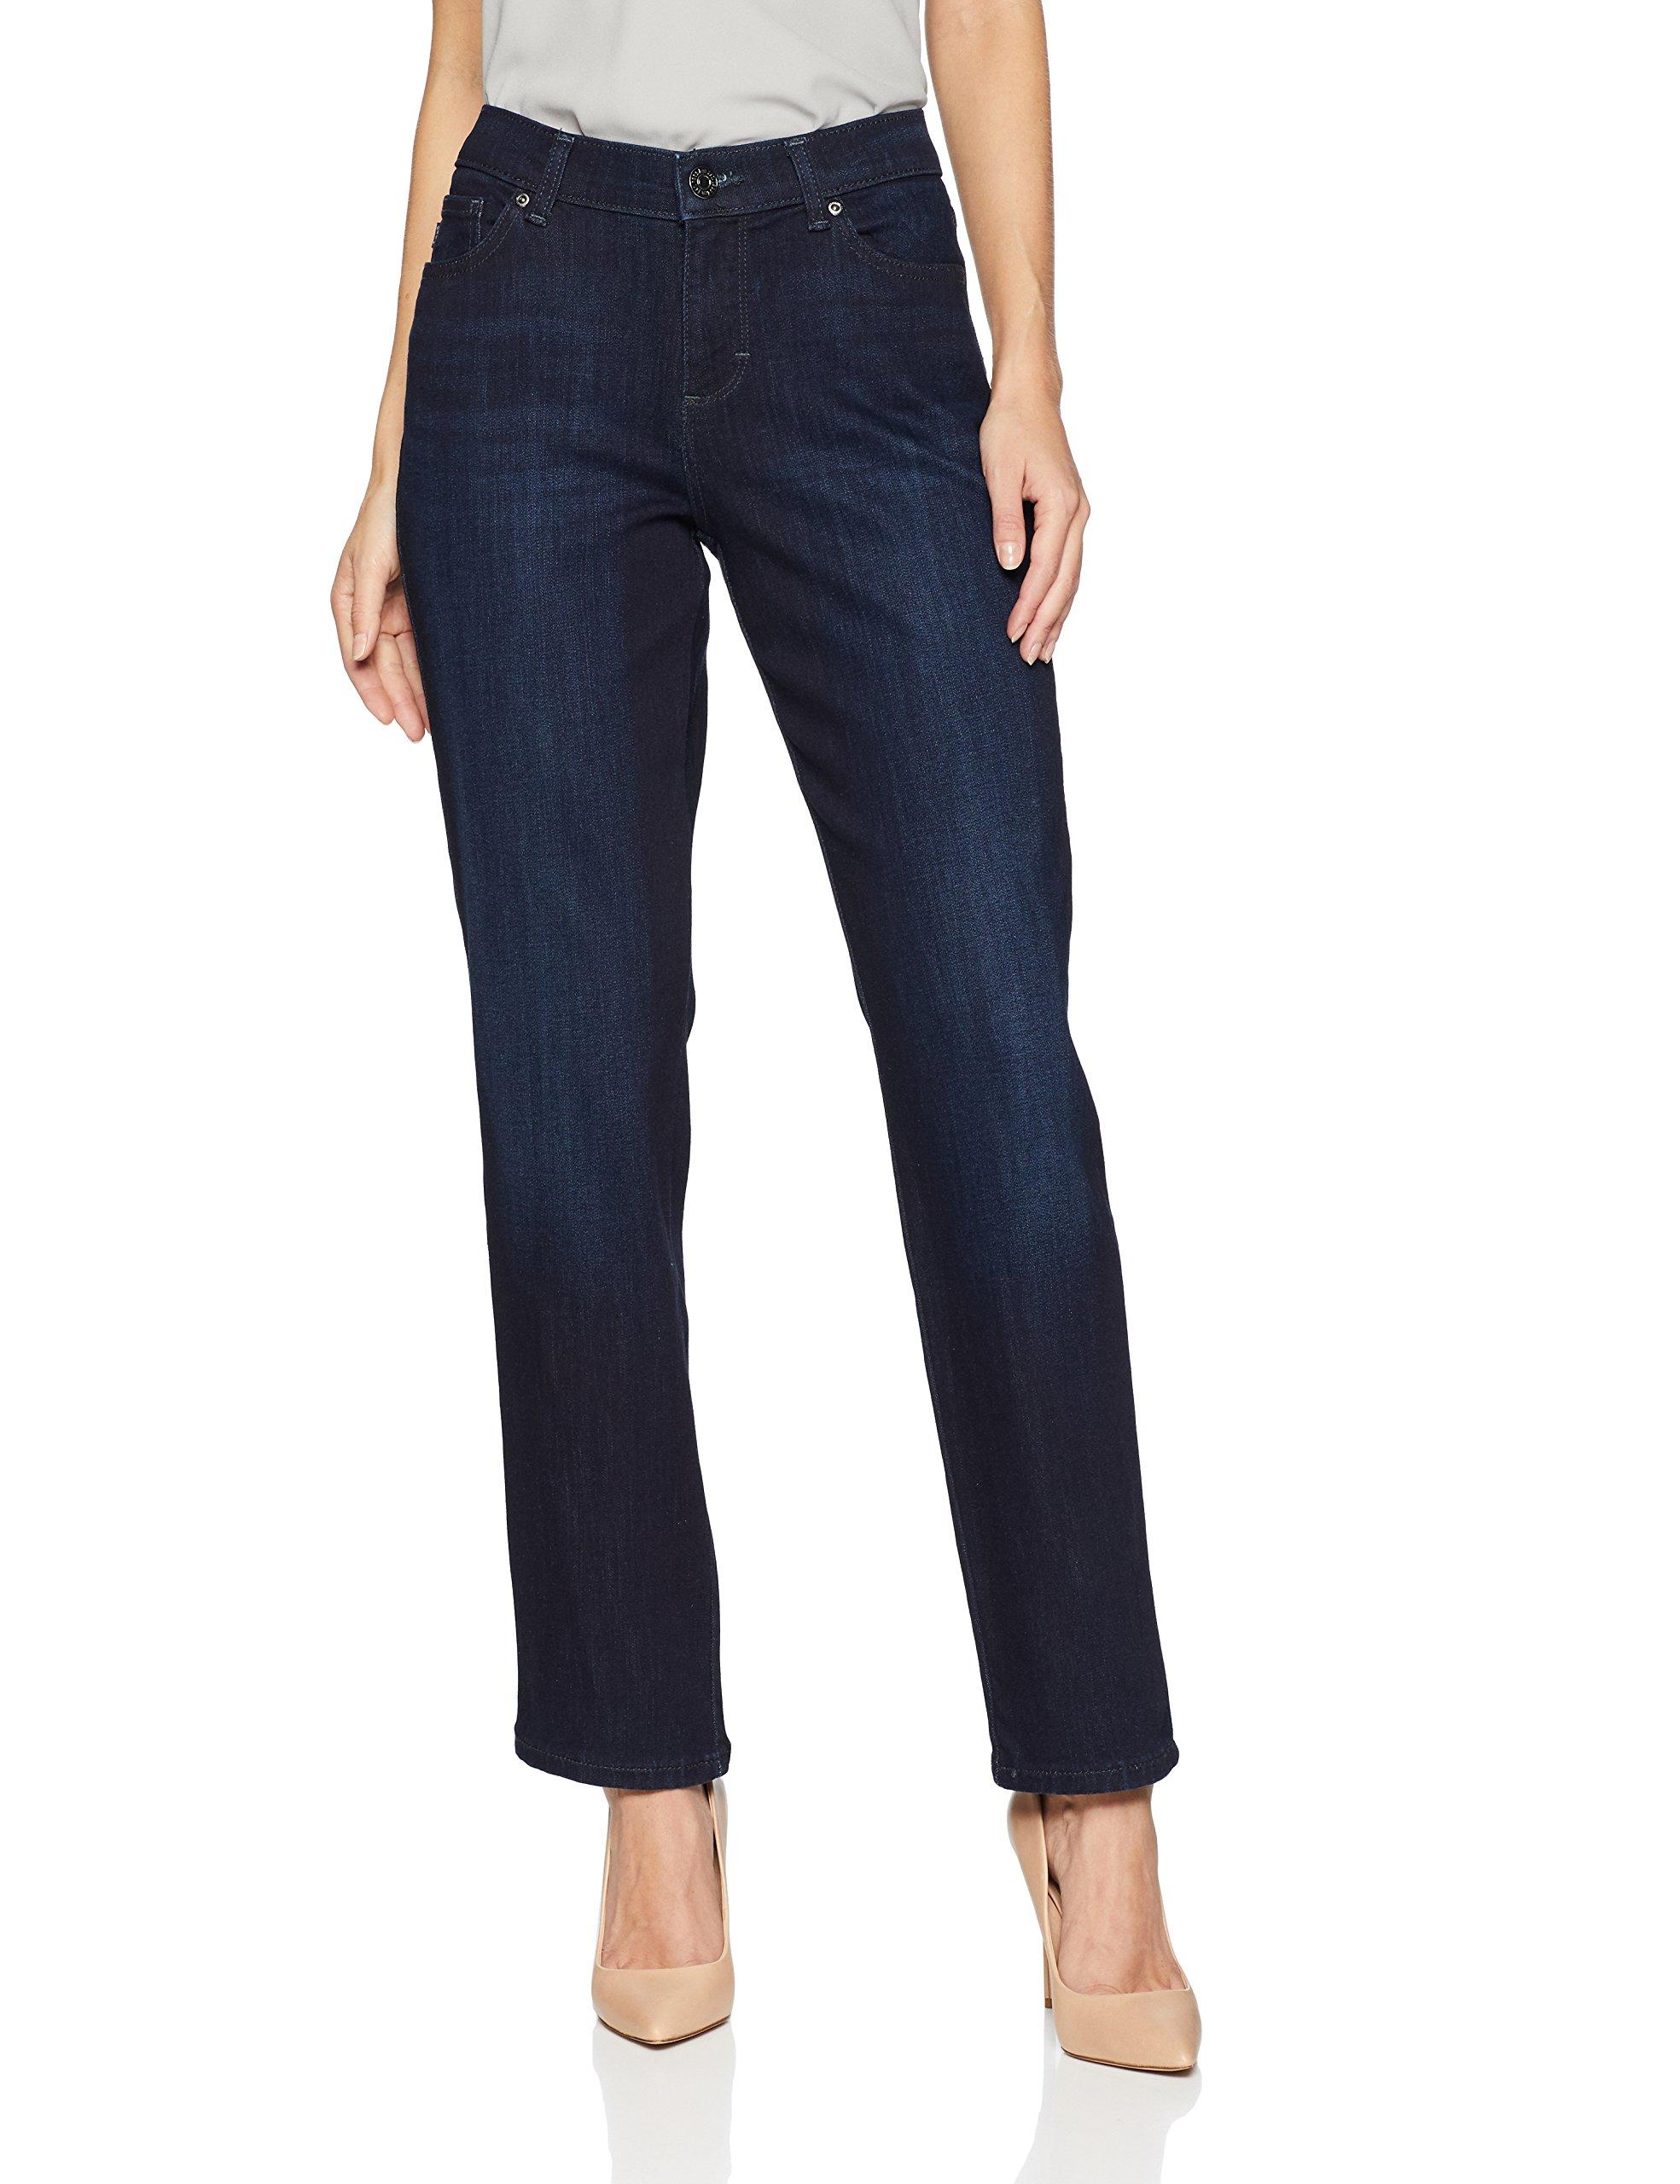 Lee Jeans Petite Relaxed Fit Straight Leg Jean in Blue - Save 17% - Lyst